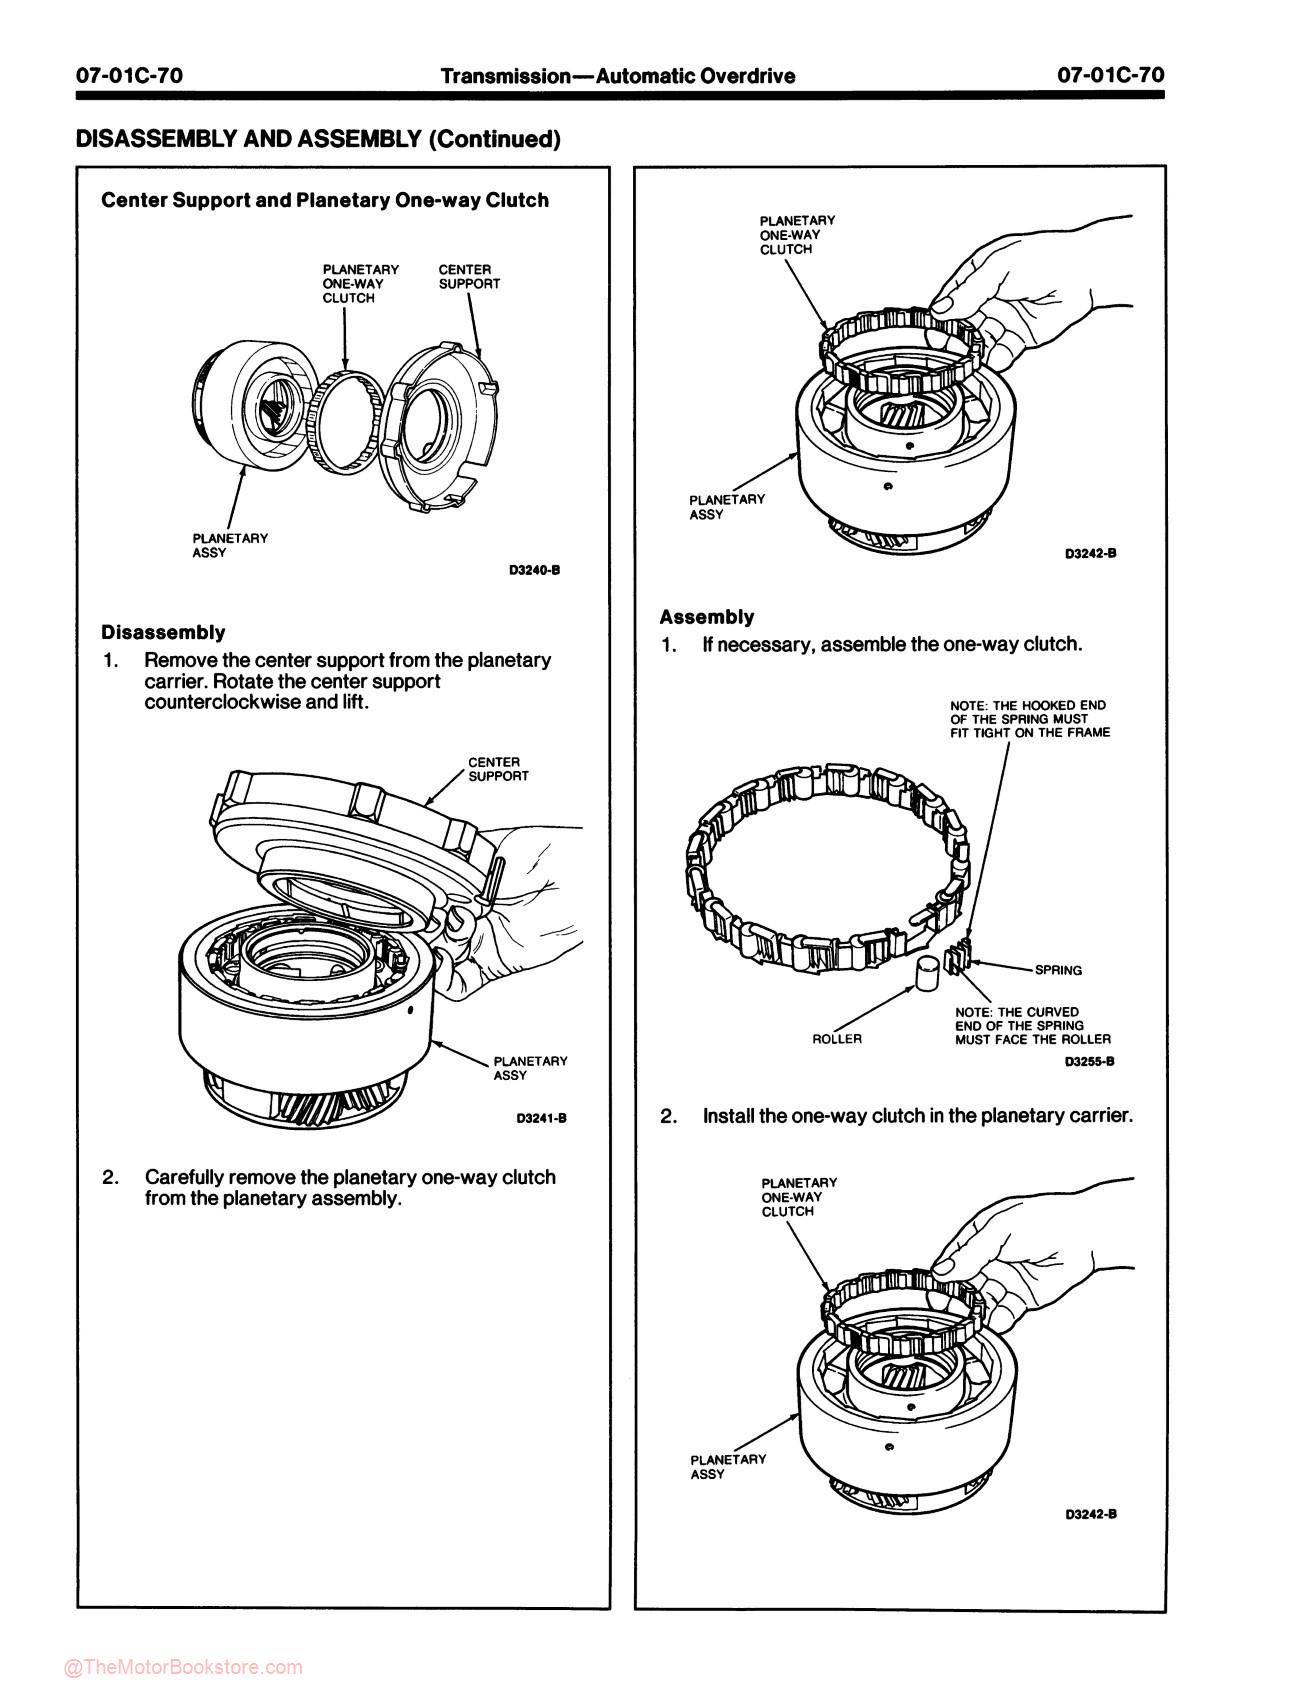 1991 Ford Truck, Bronco, Econoline Shop Manual - F-Series - Sample Page 2